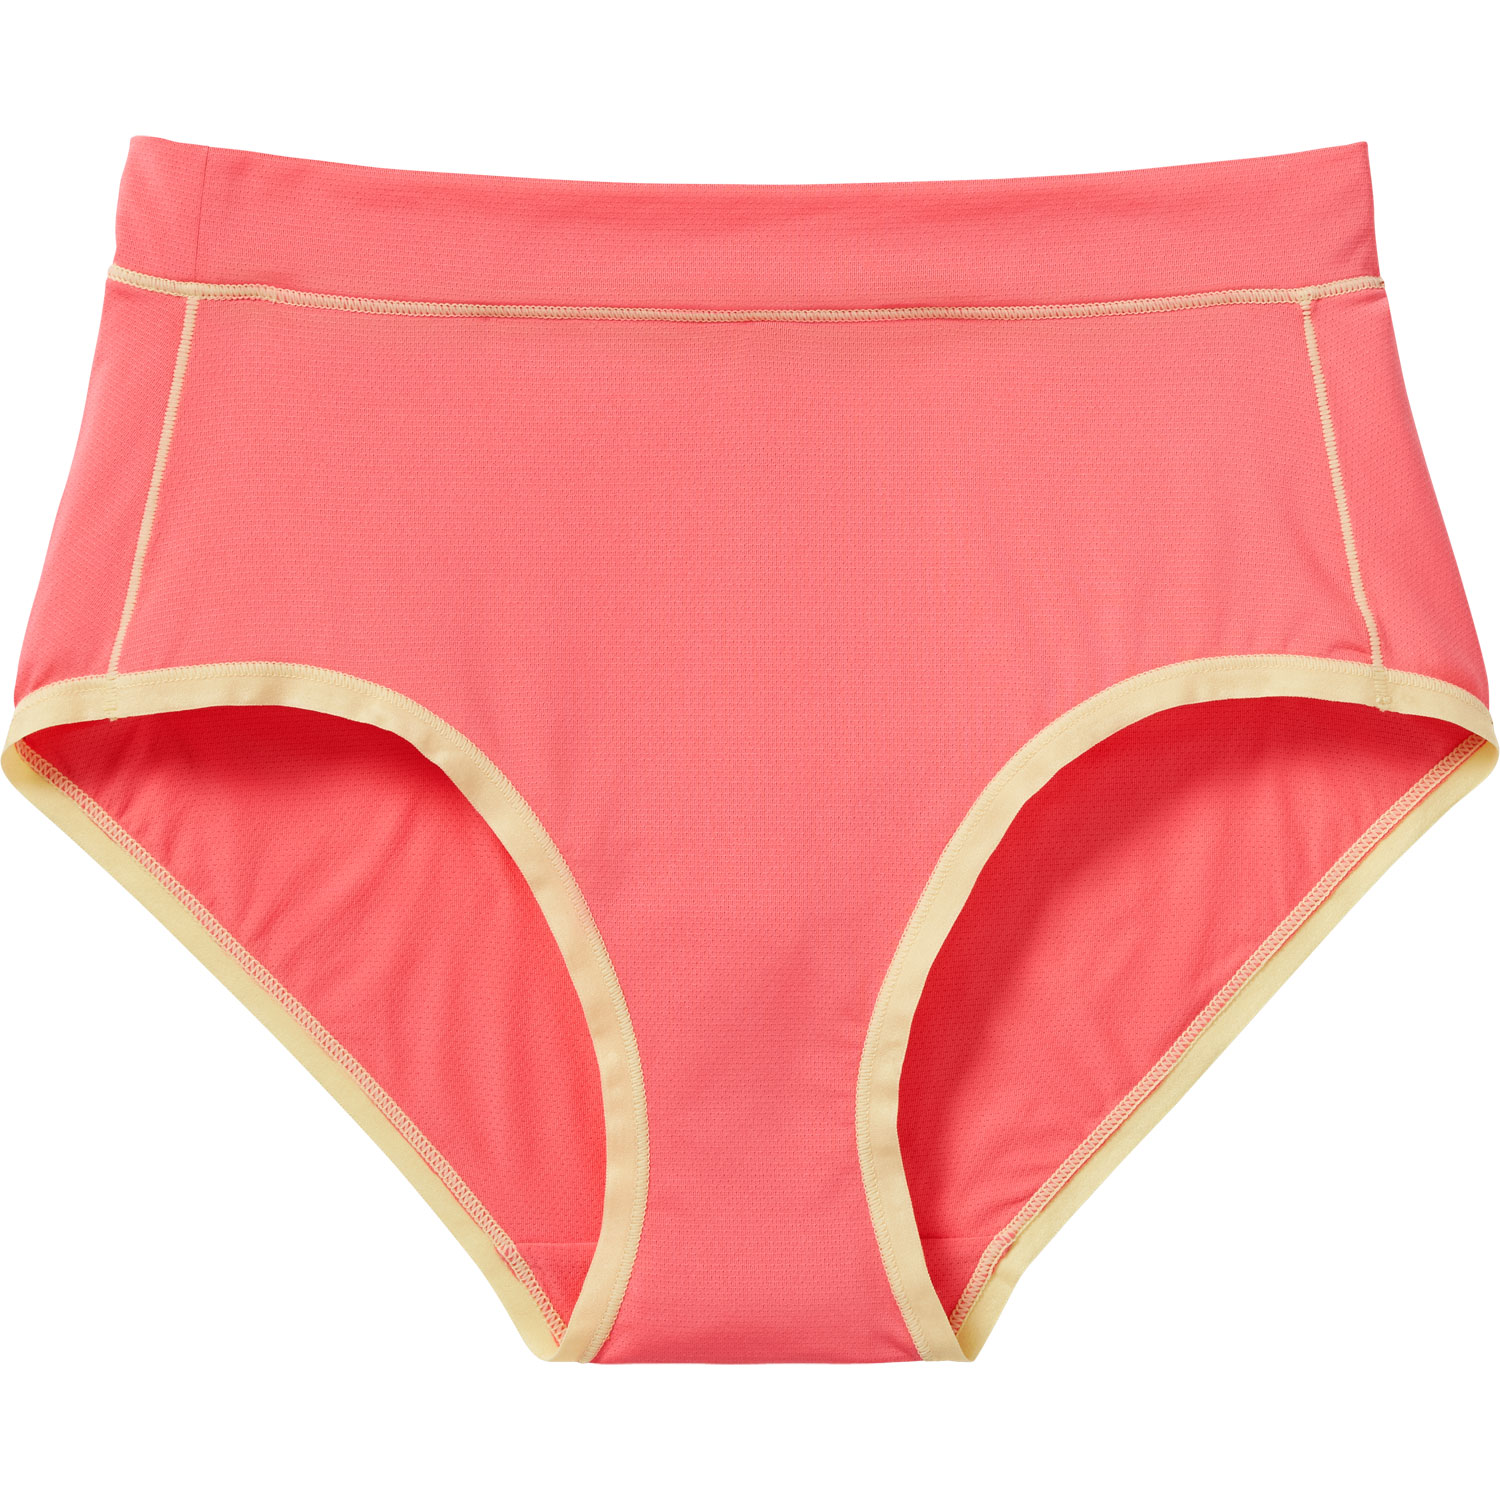 Duluth Trading Co. Women's Underwear Breeze Shooter Tiny Vent